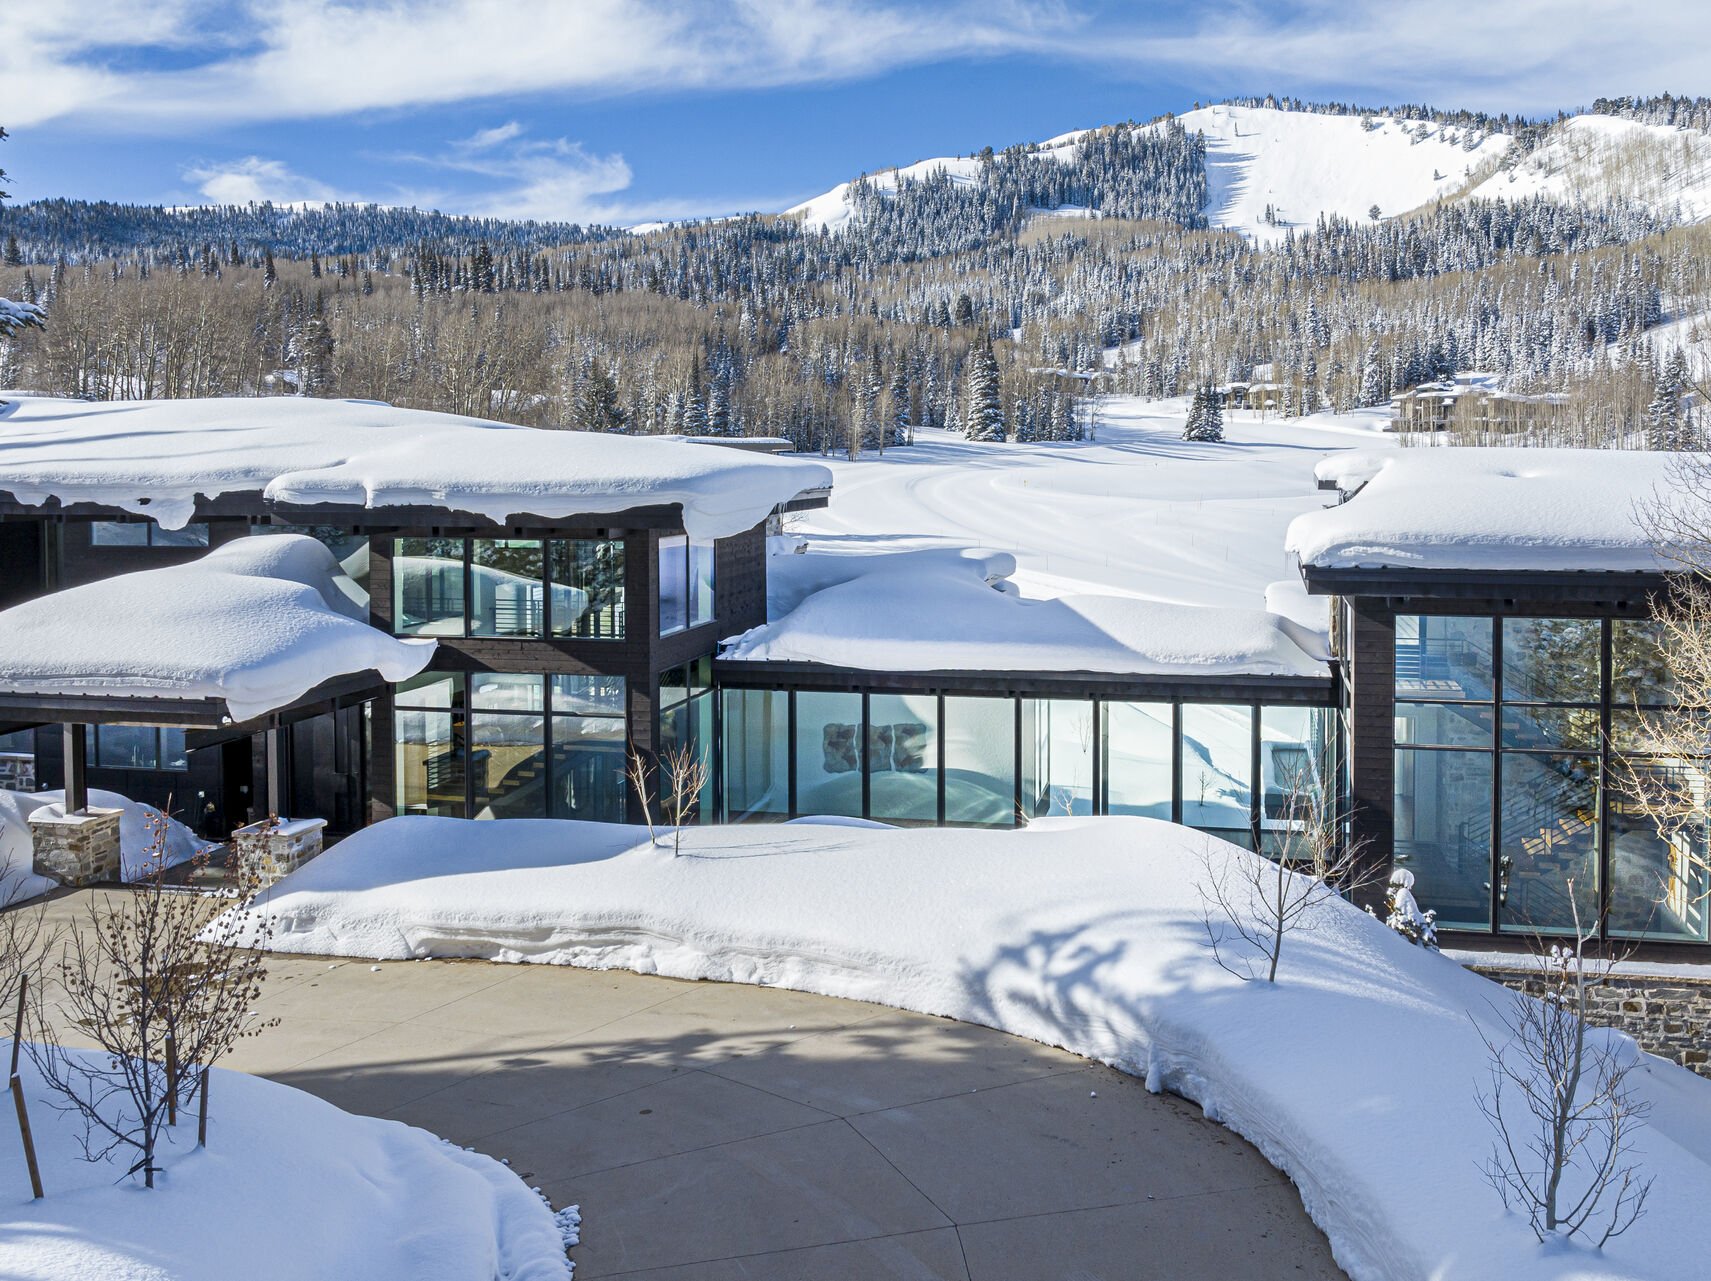 Heated driveway to this amazing property